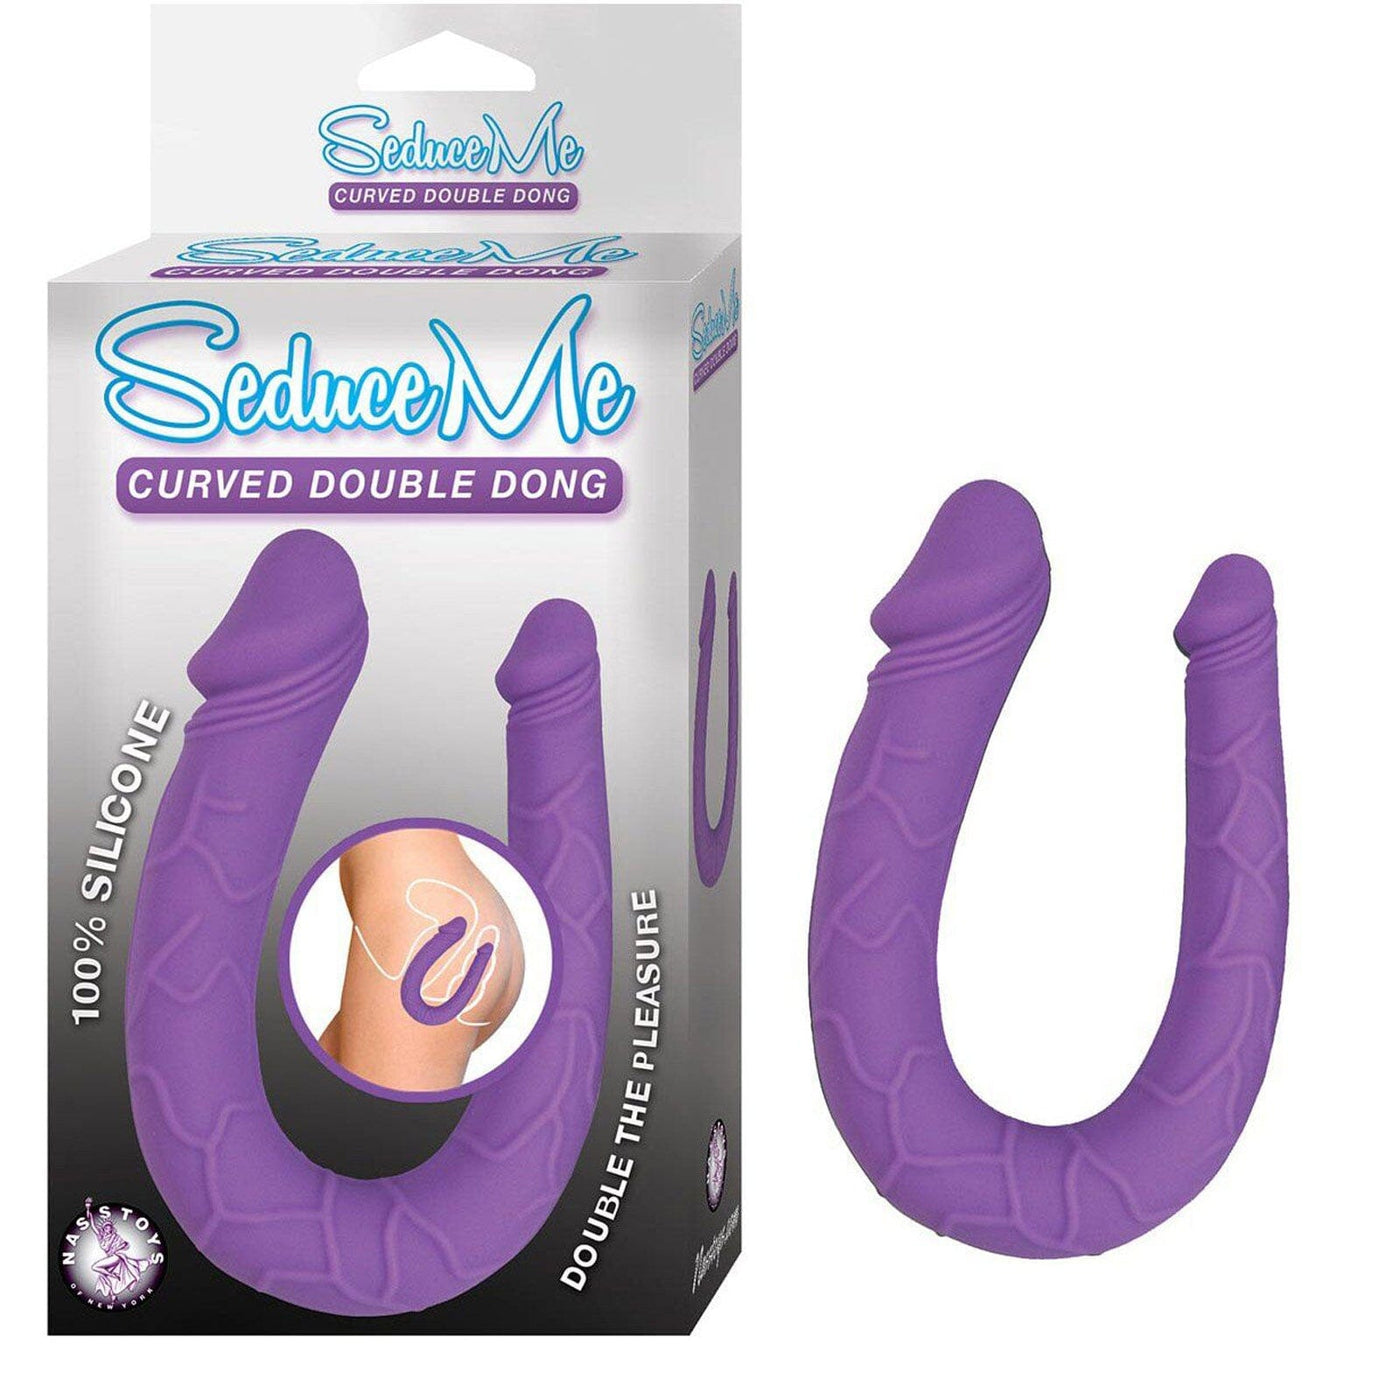 Seduce Me Curved Life-Like Double Dong